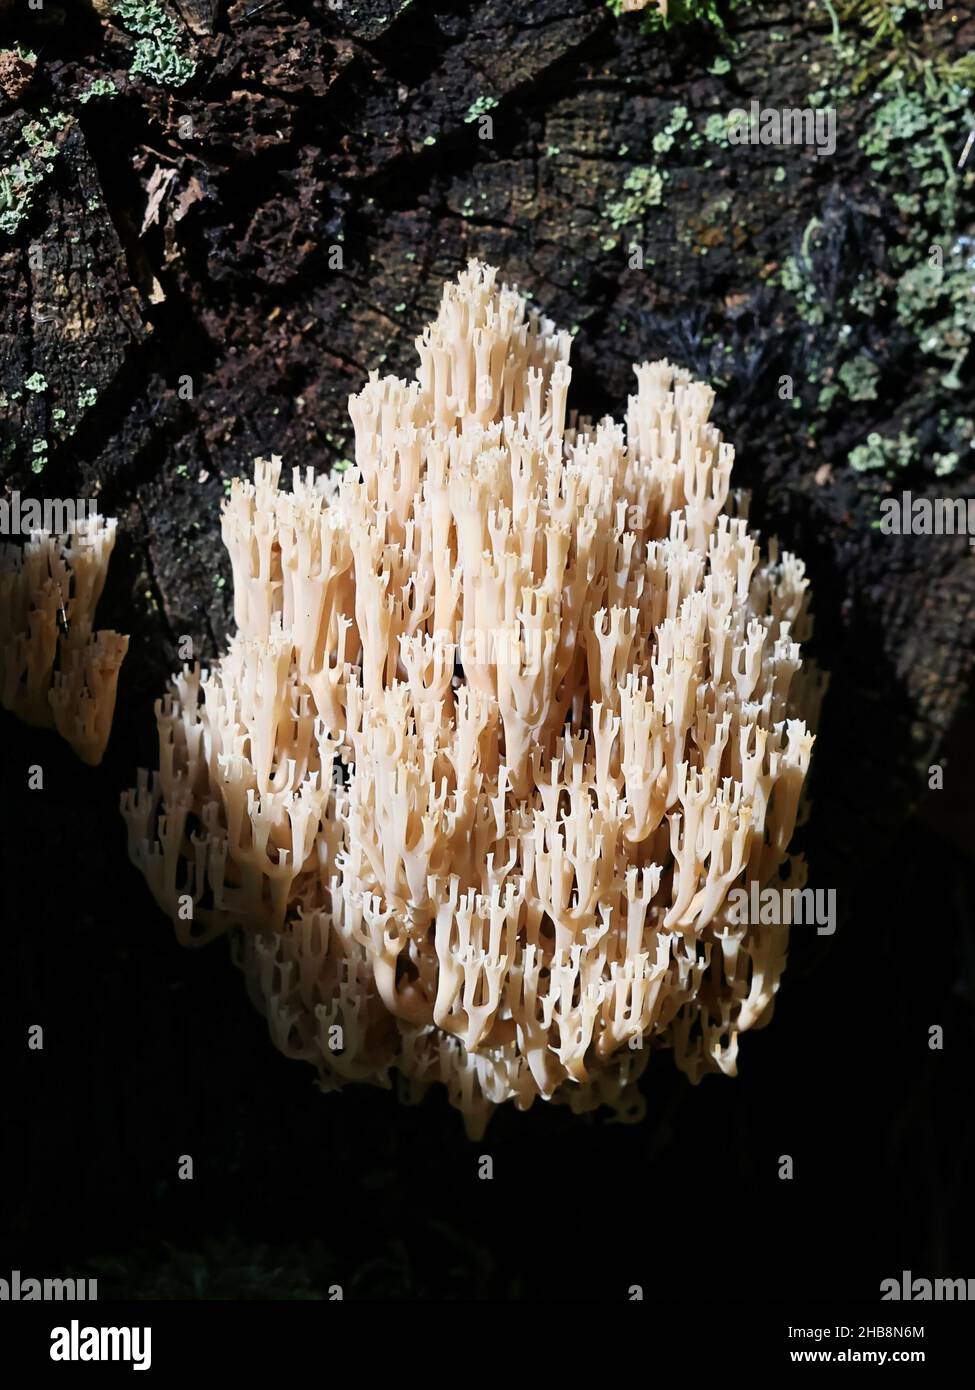 Artomyces pyxidatus, known as crown coral, crown-tipped coral fungus or candelabra coral, wild mushroom from Finland Stock Photo